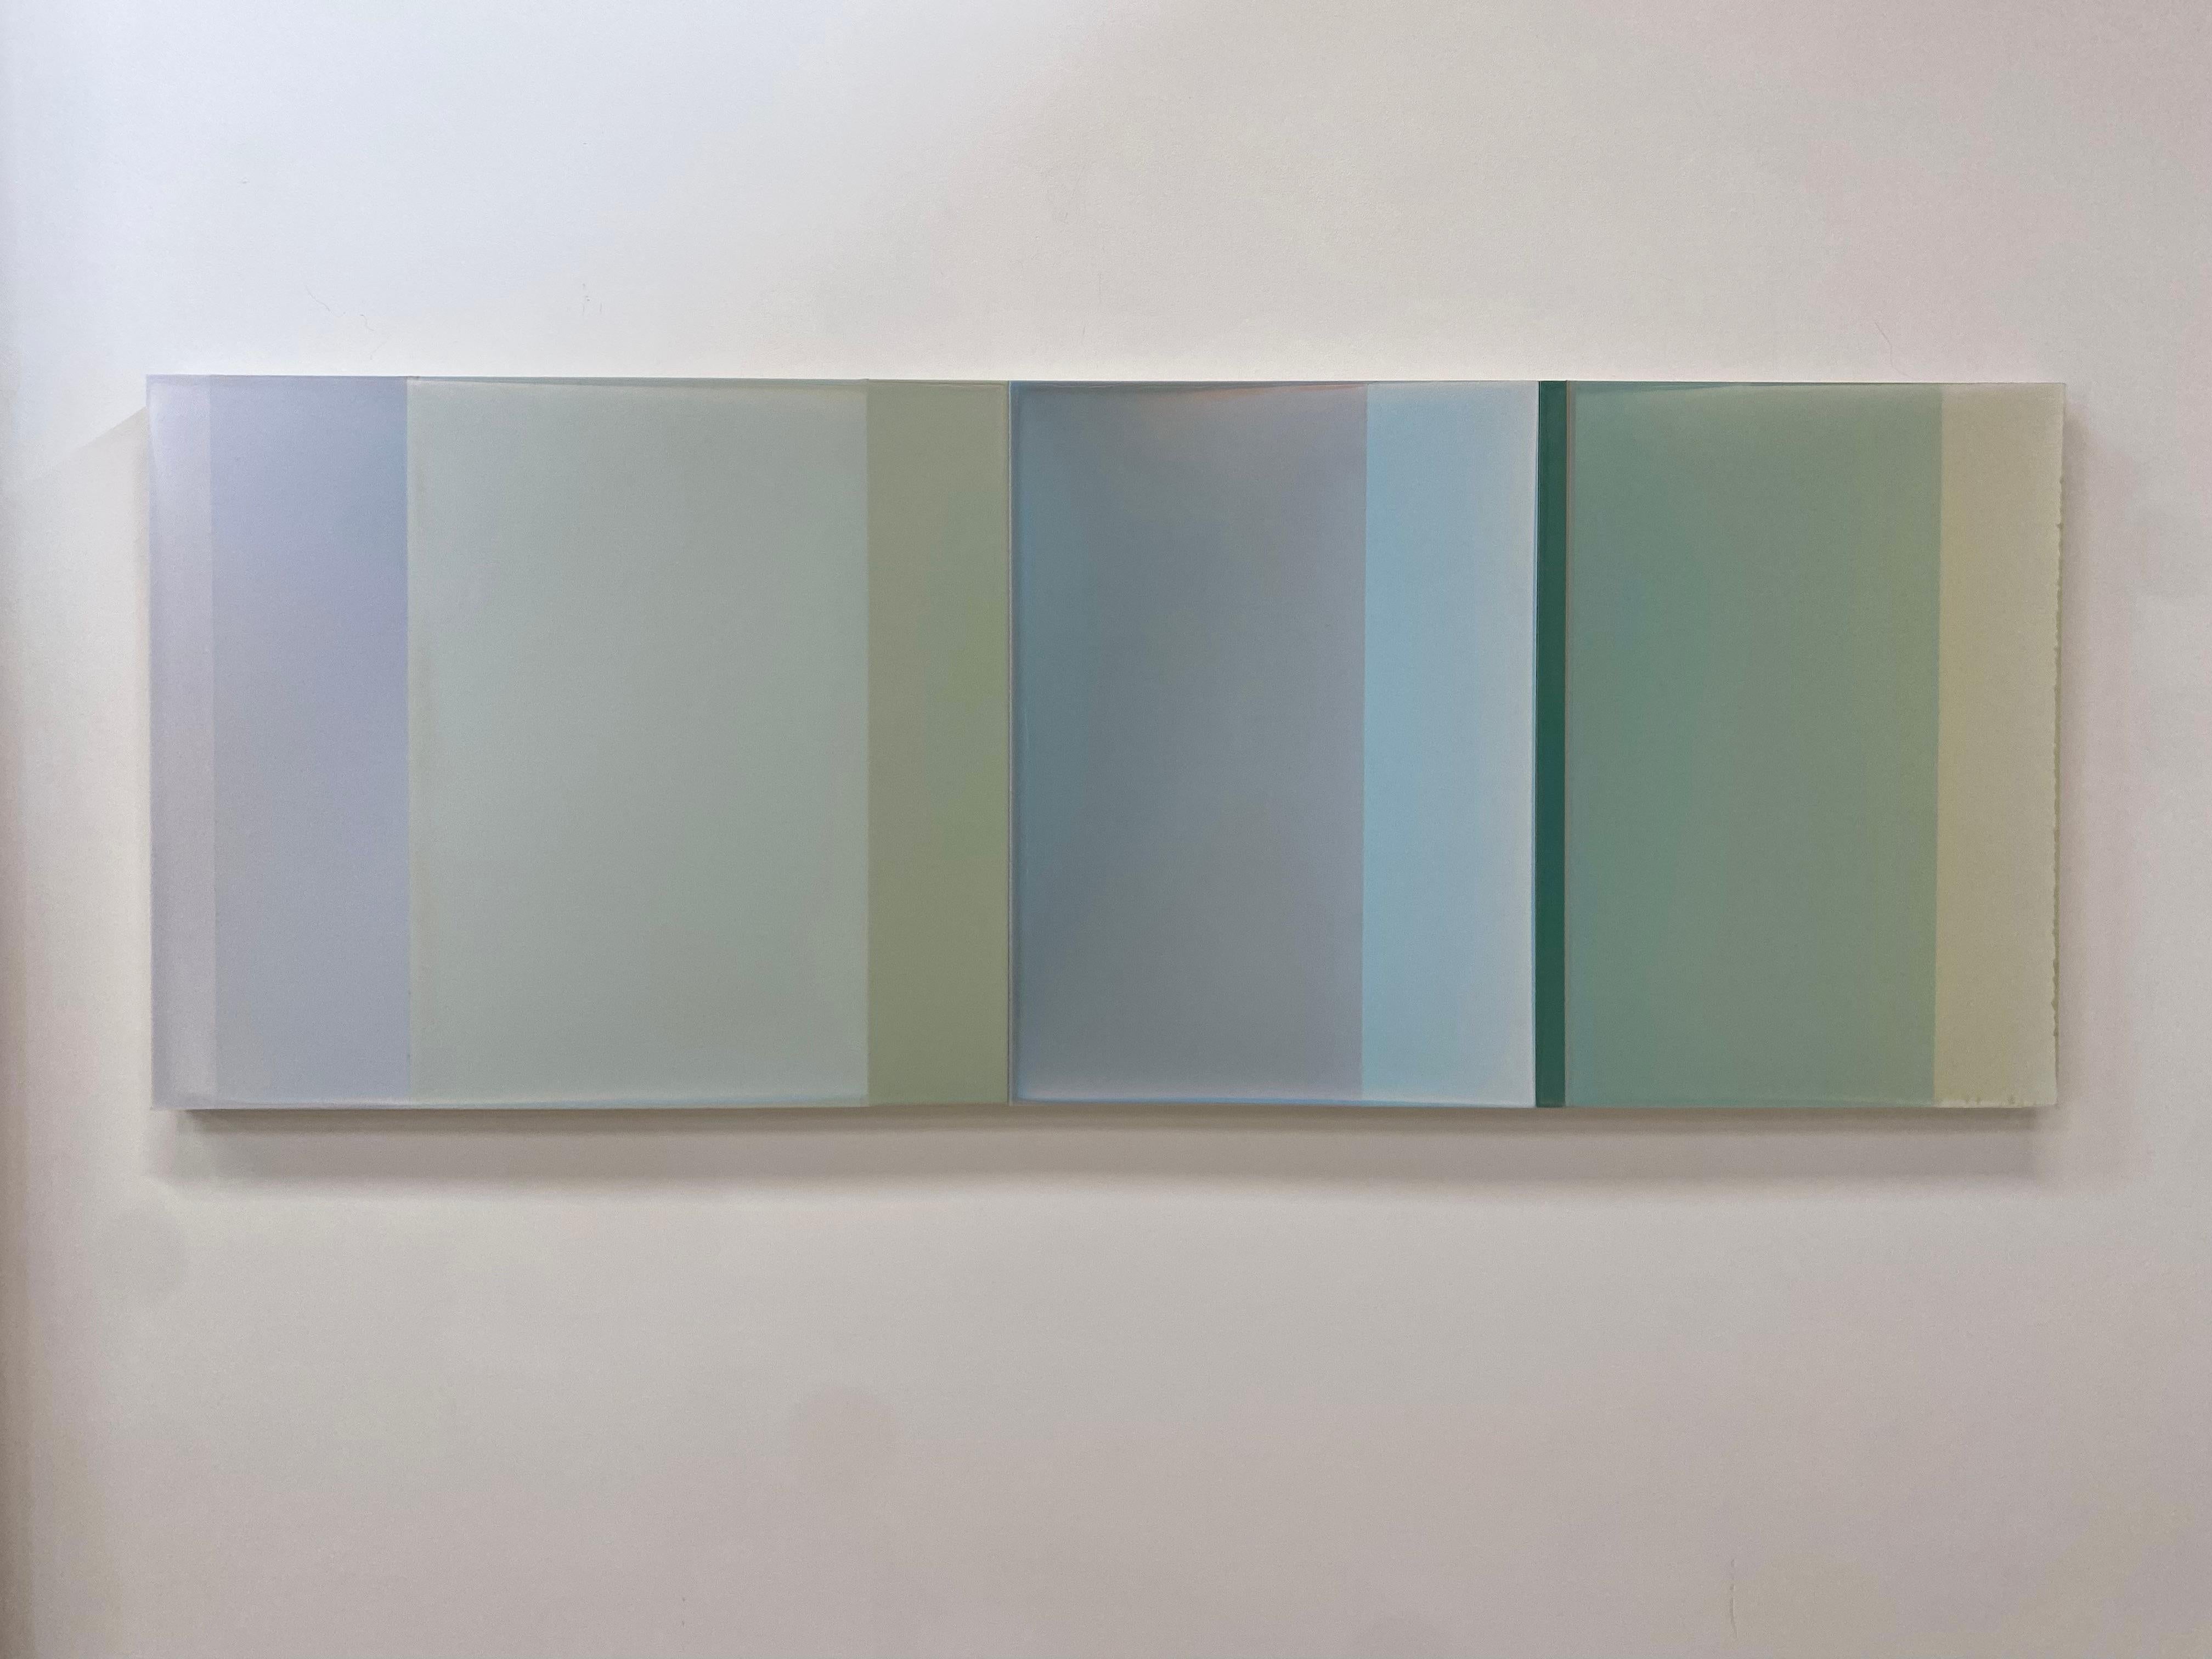 The surface of Vertical Landscape by Susan English is a wonderful play of color, light, and composition. Hues of soft jade, pale sage green, light mint, emerald green and pale bluish periwinkle meet and merge in softly transitioning planes composed